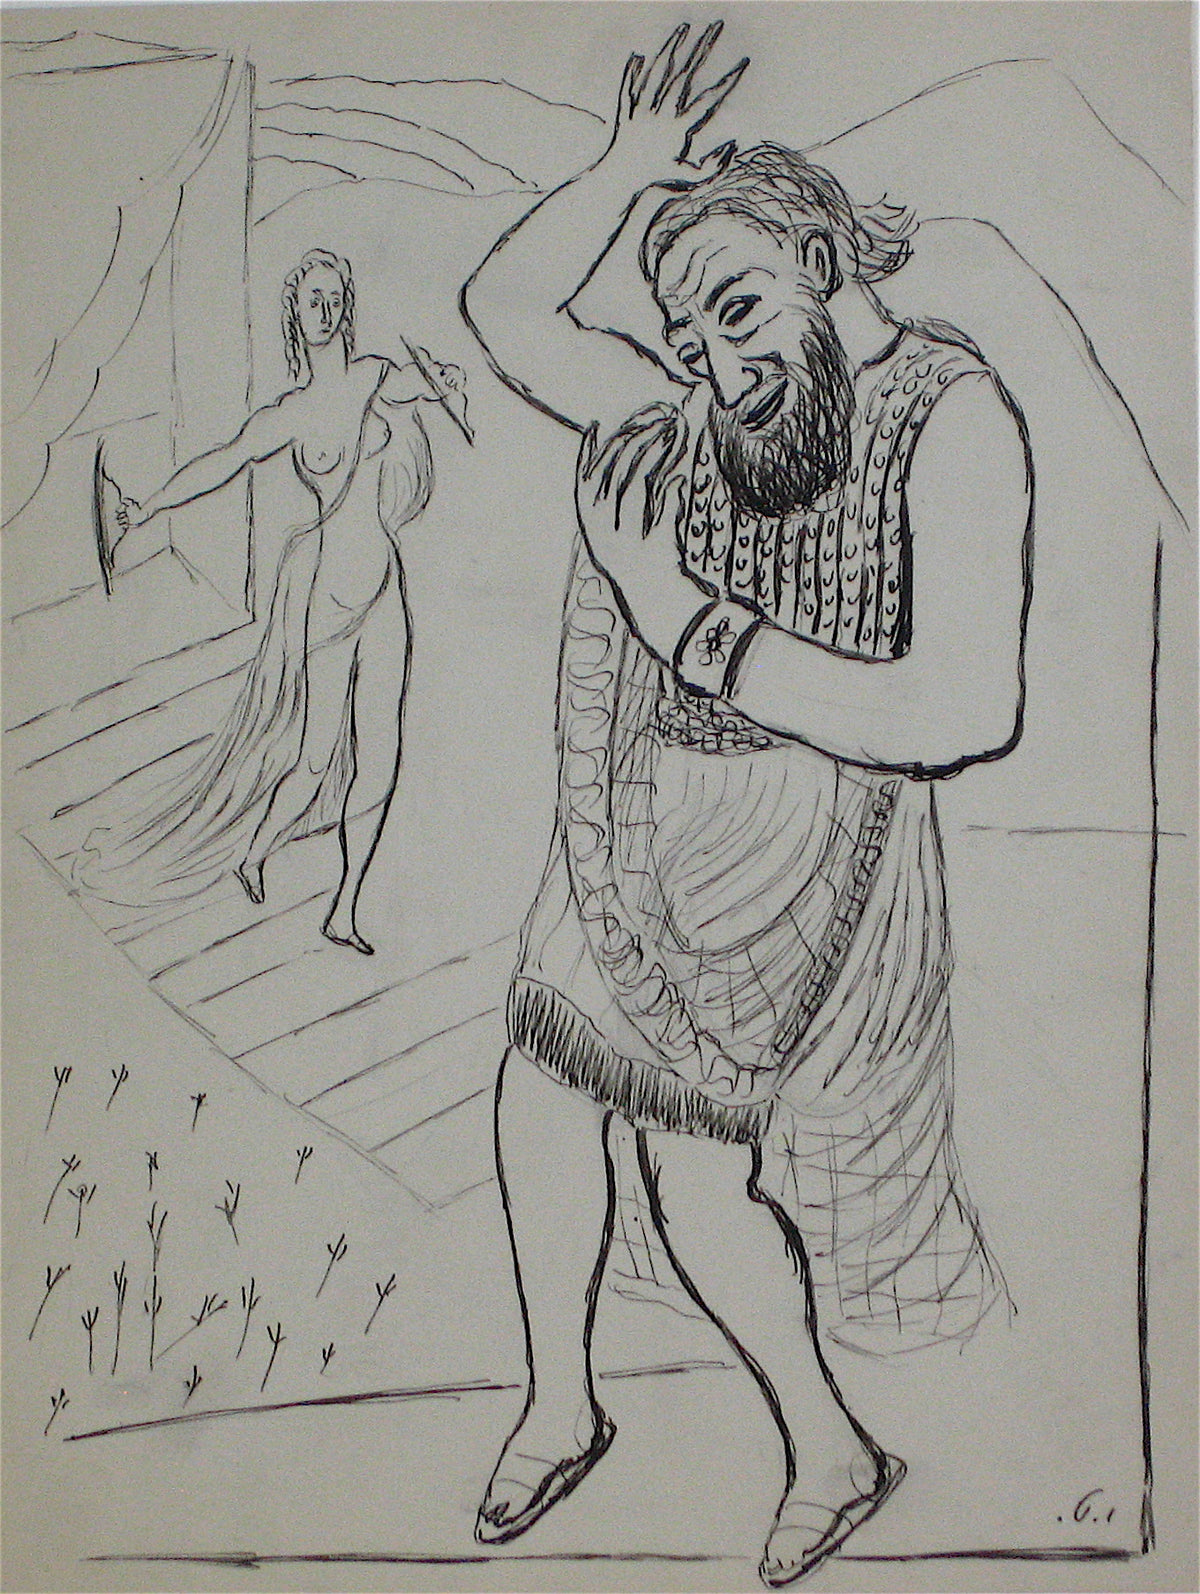 Figurative Scene of a Man and Woman &lt;br&gt;Early 20th Century Ink&lt;br&gt;&lt;br&gt;#11326